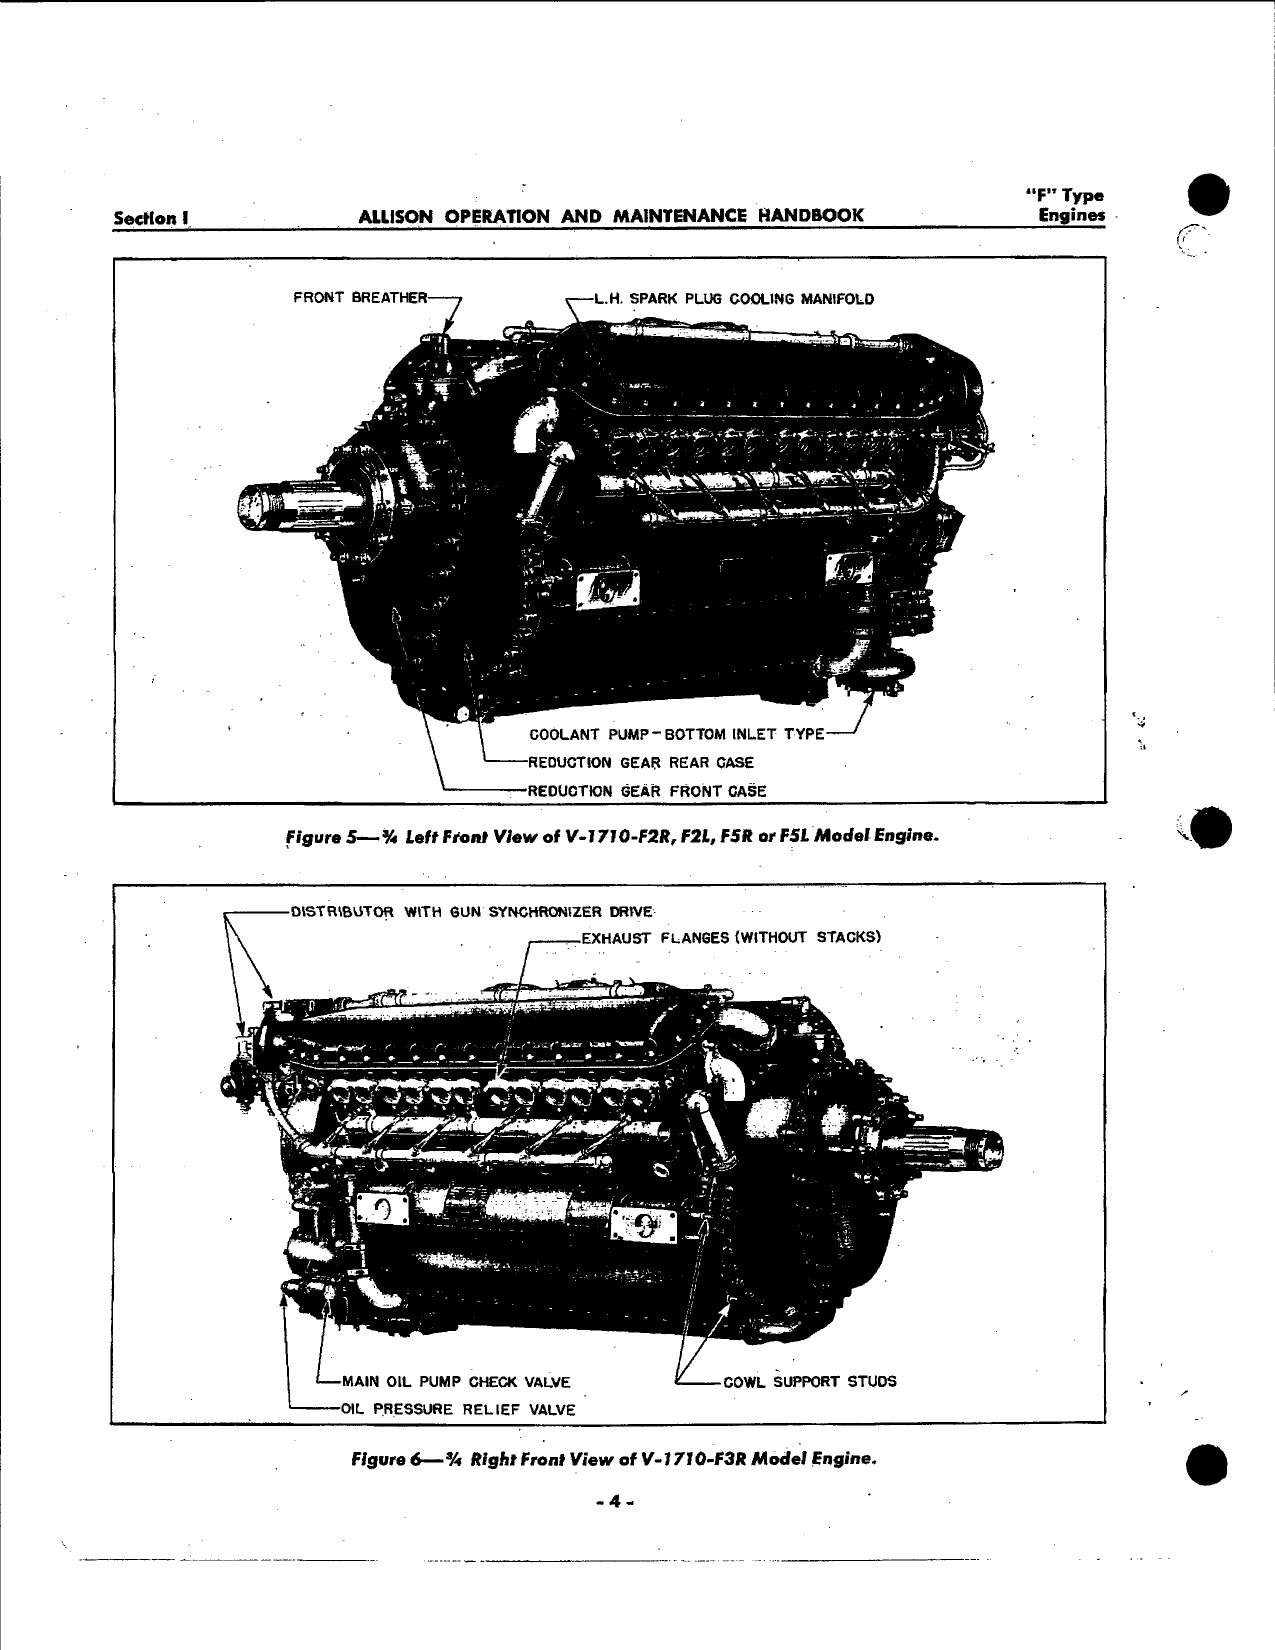 Sample page 10 from AirCorps Library document: Handbook of Operation and Maintenance for Allison V-1710 